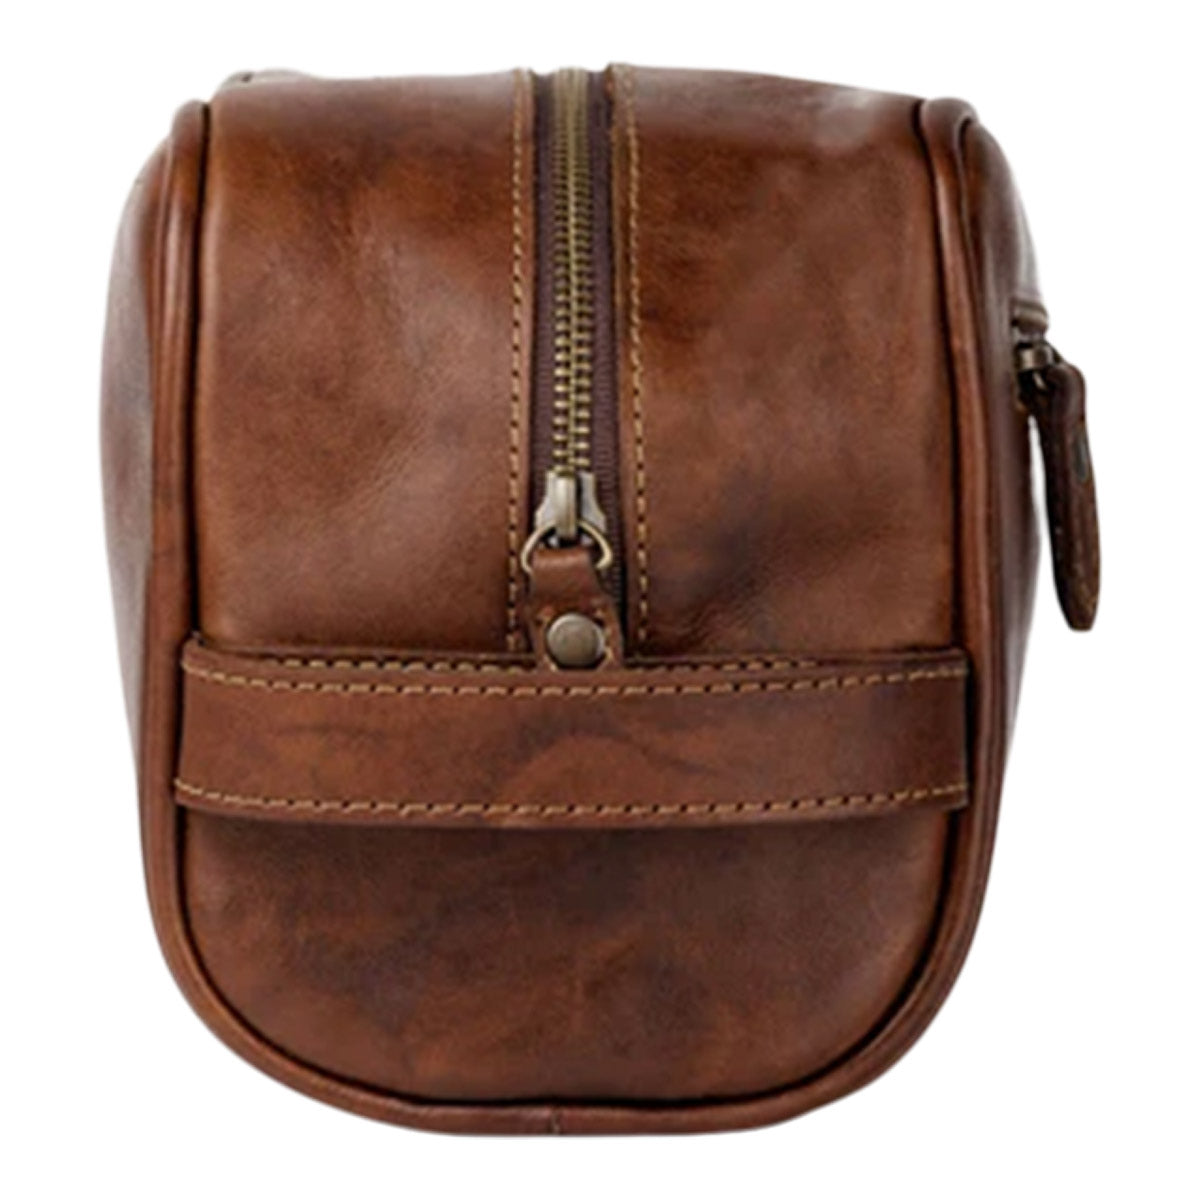 Mission Mercantile Benjamin Leather Toiletry Wash Bag